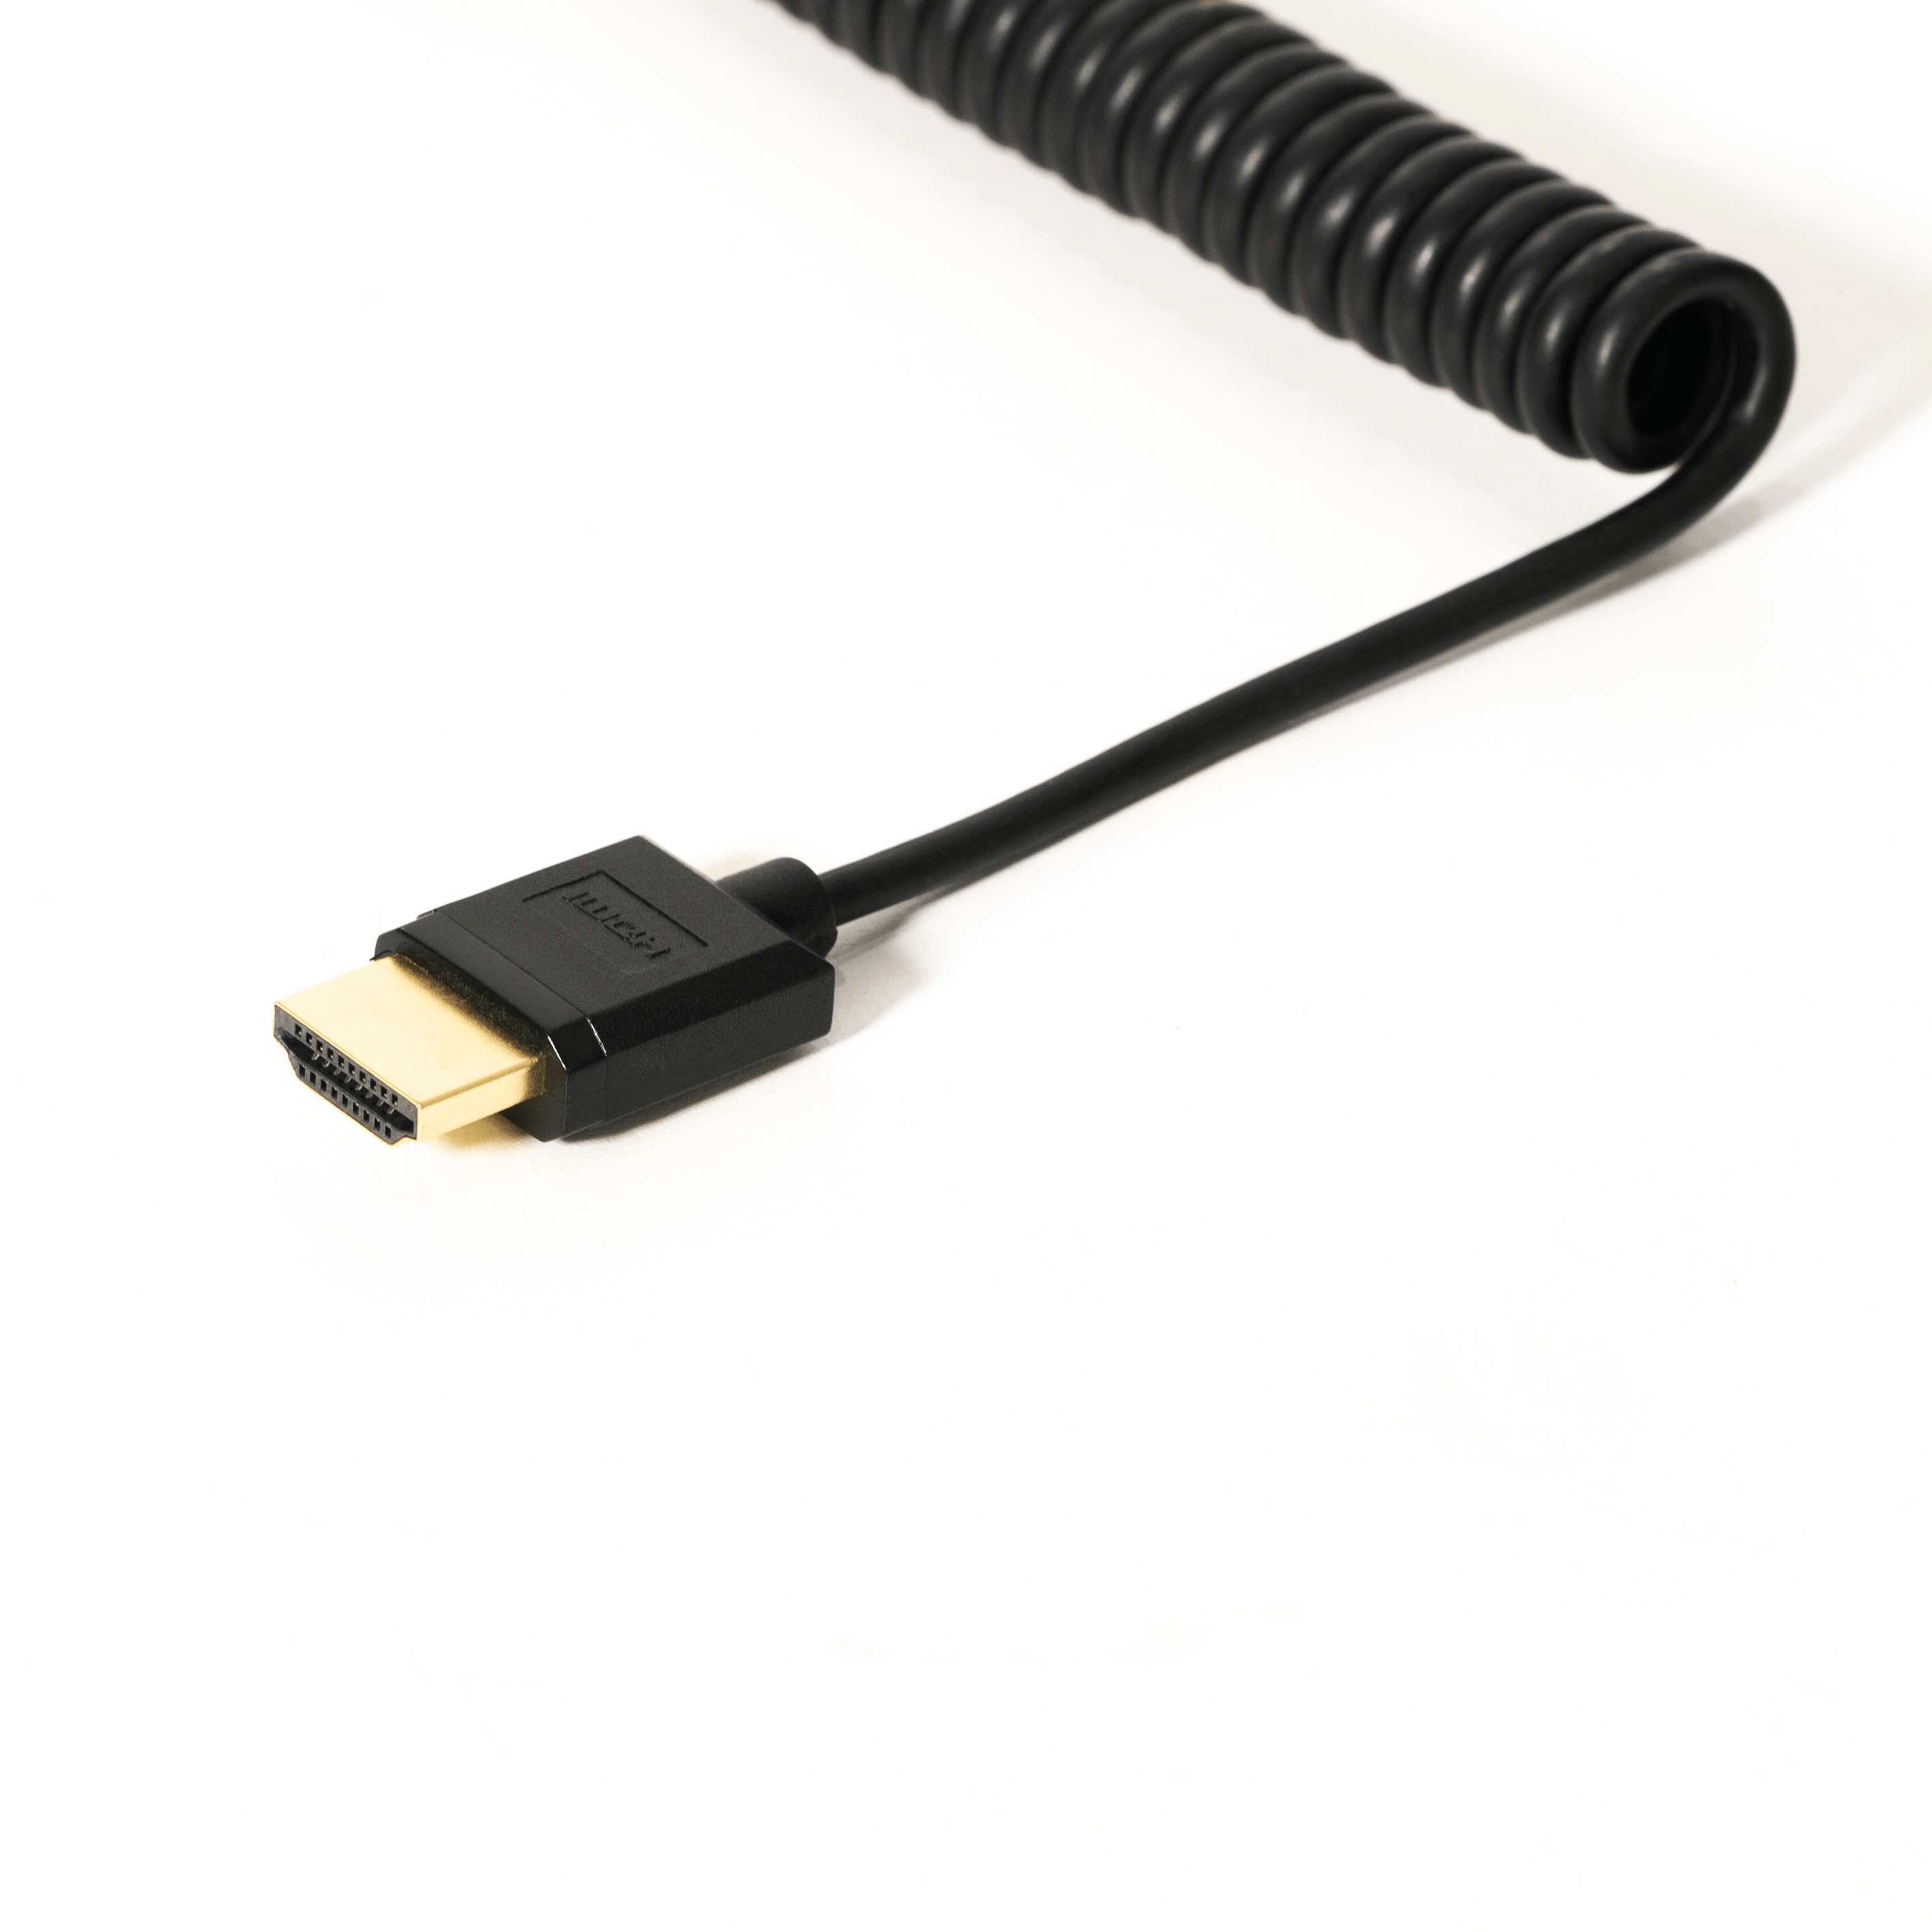 5 Meter HDMI to Mini C Cable / 16 FT